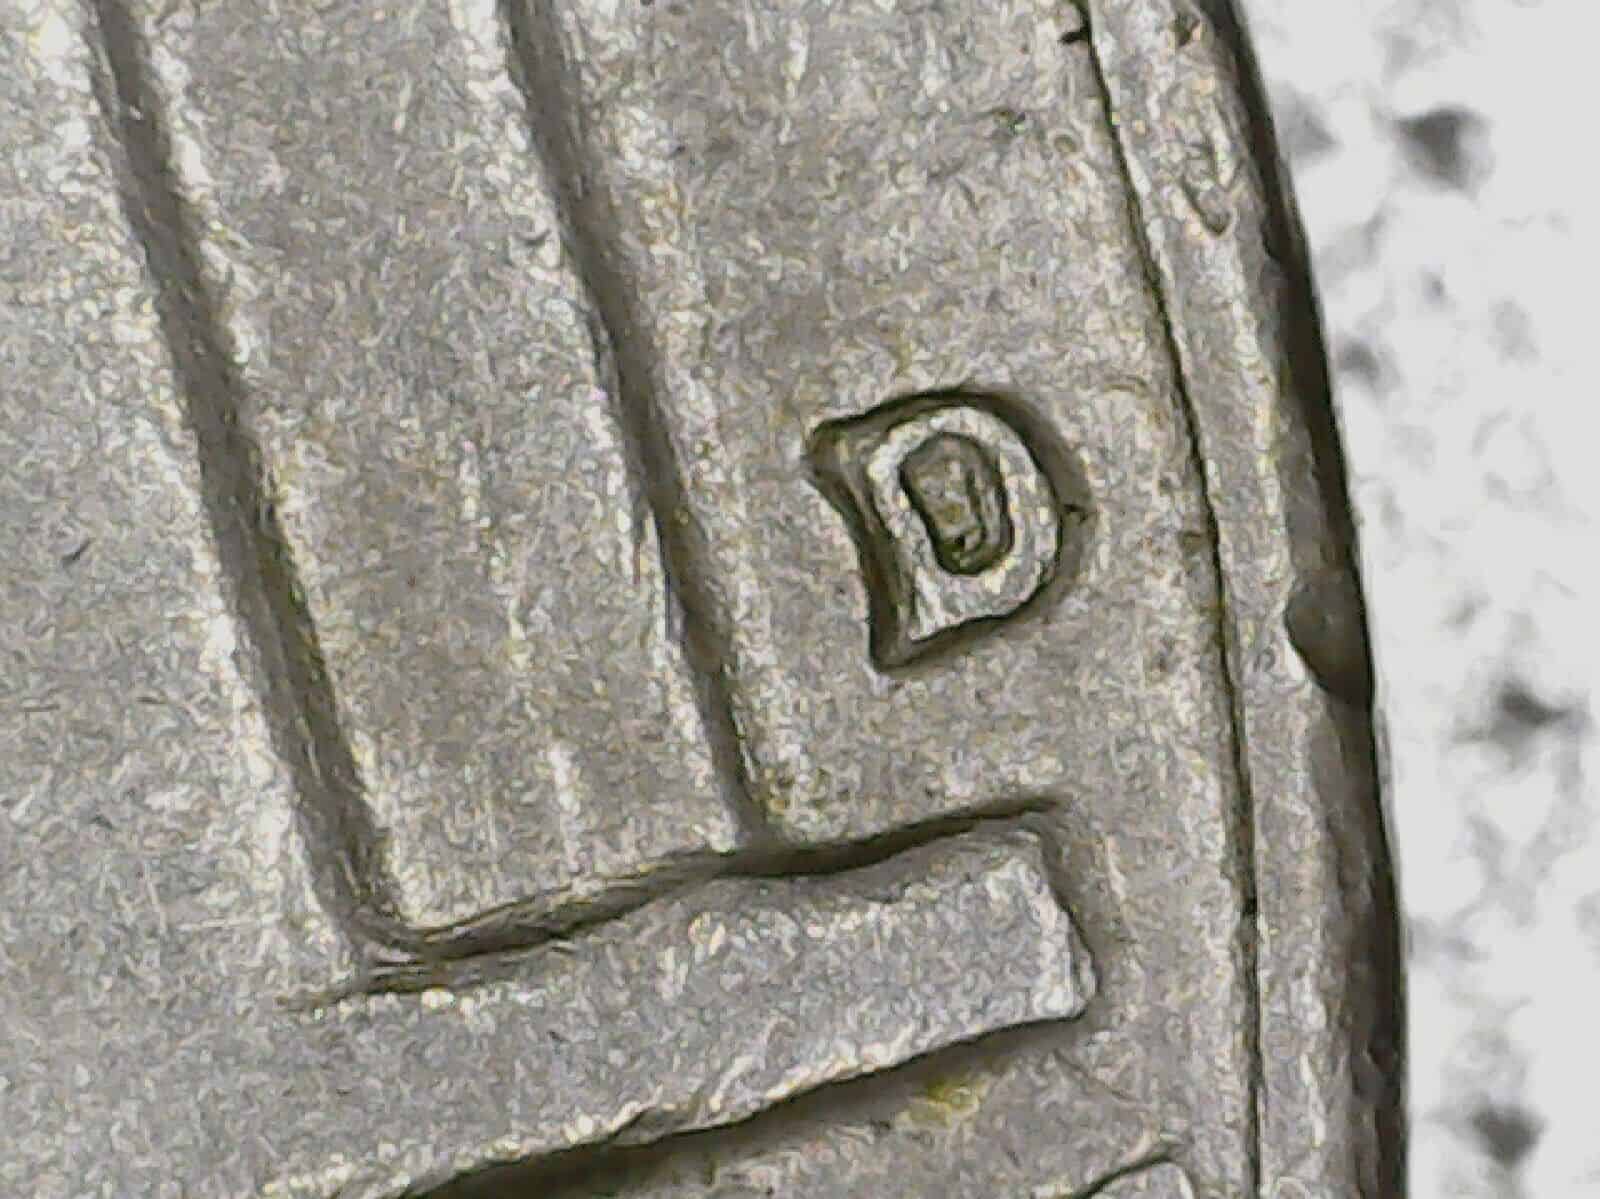 1964 "D" Nickel - Repunched Mint Mark